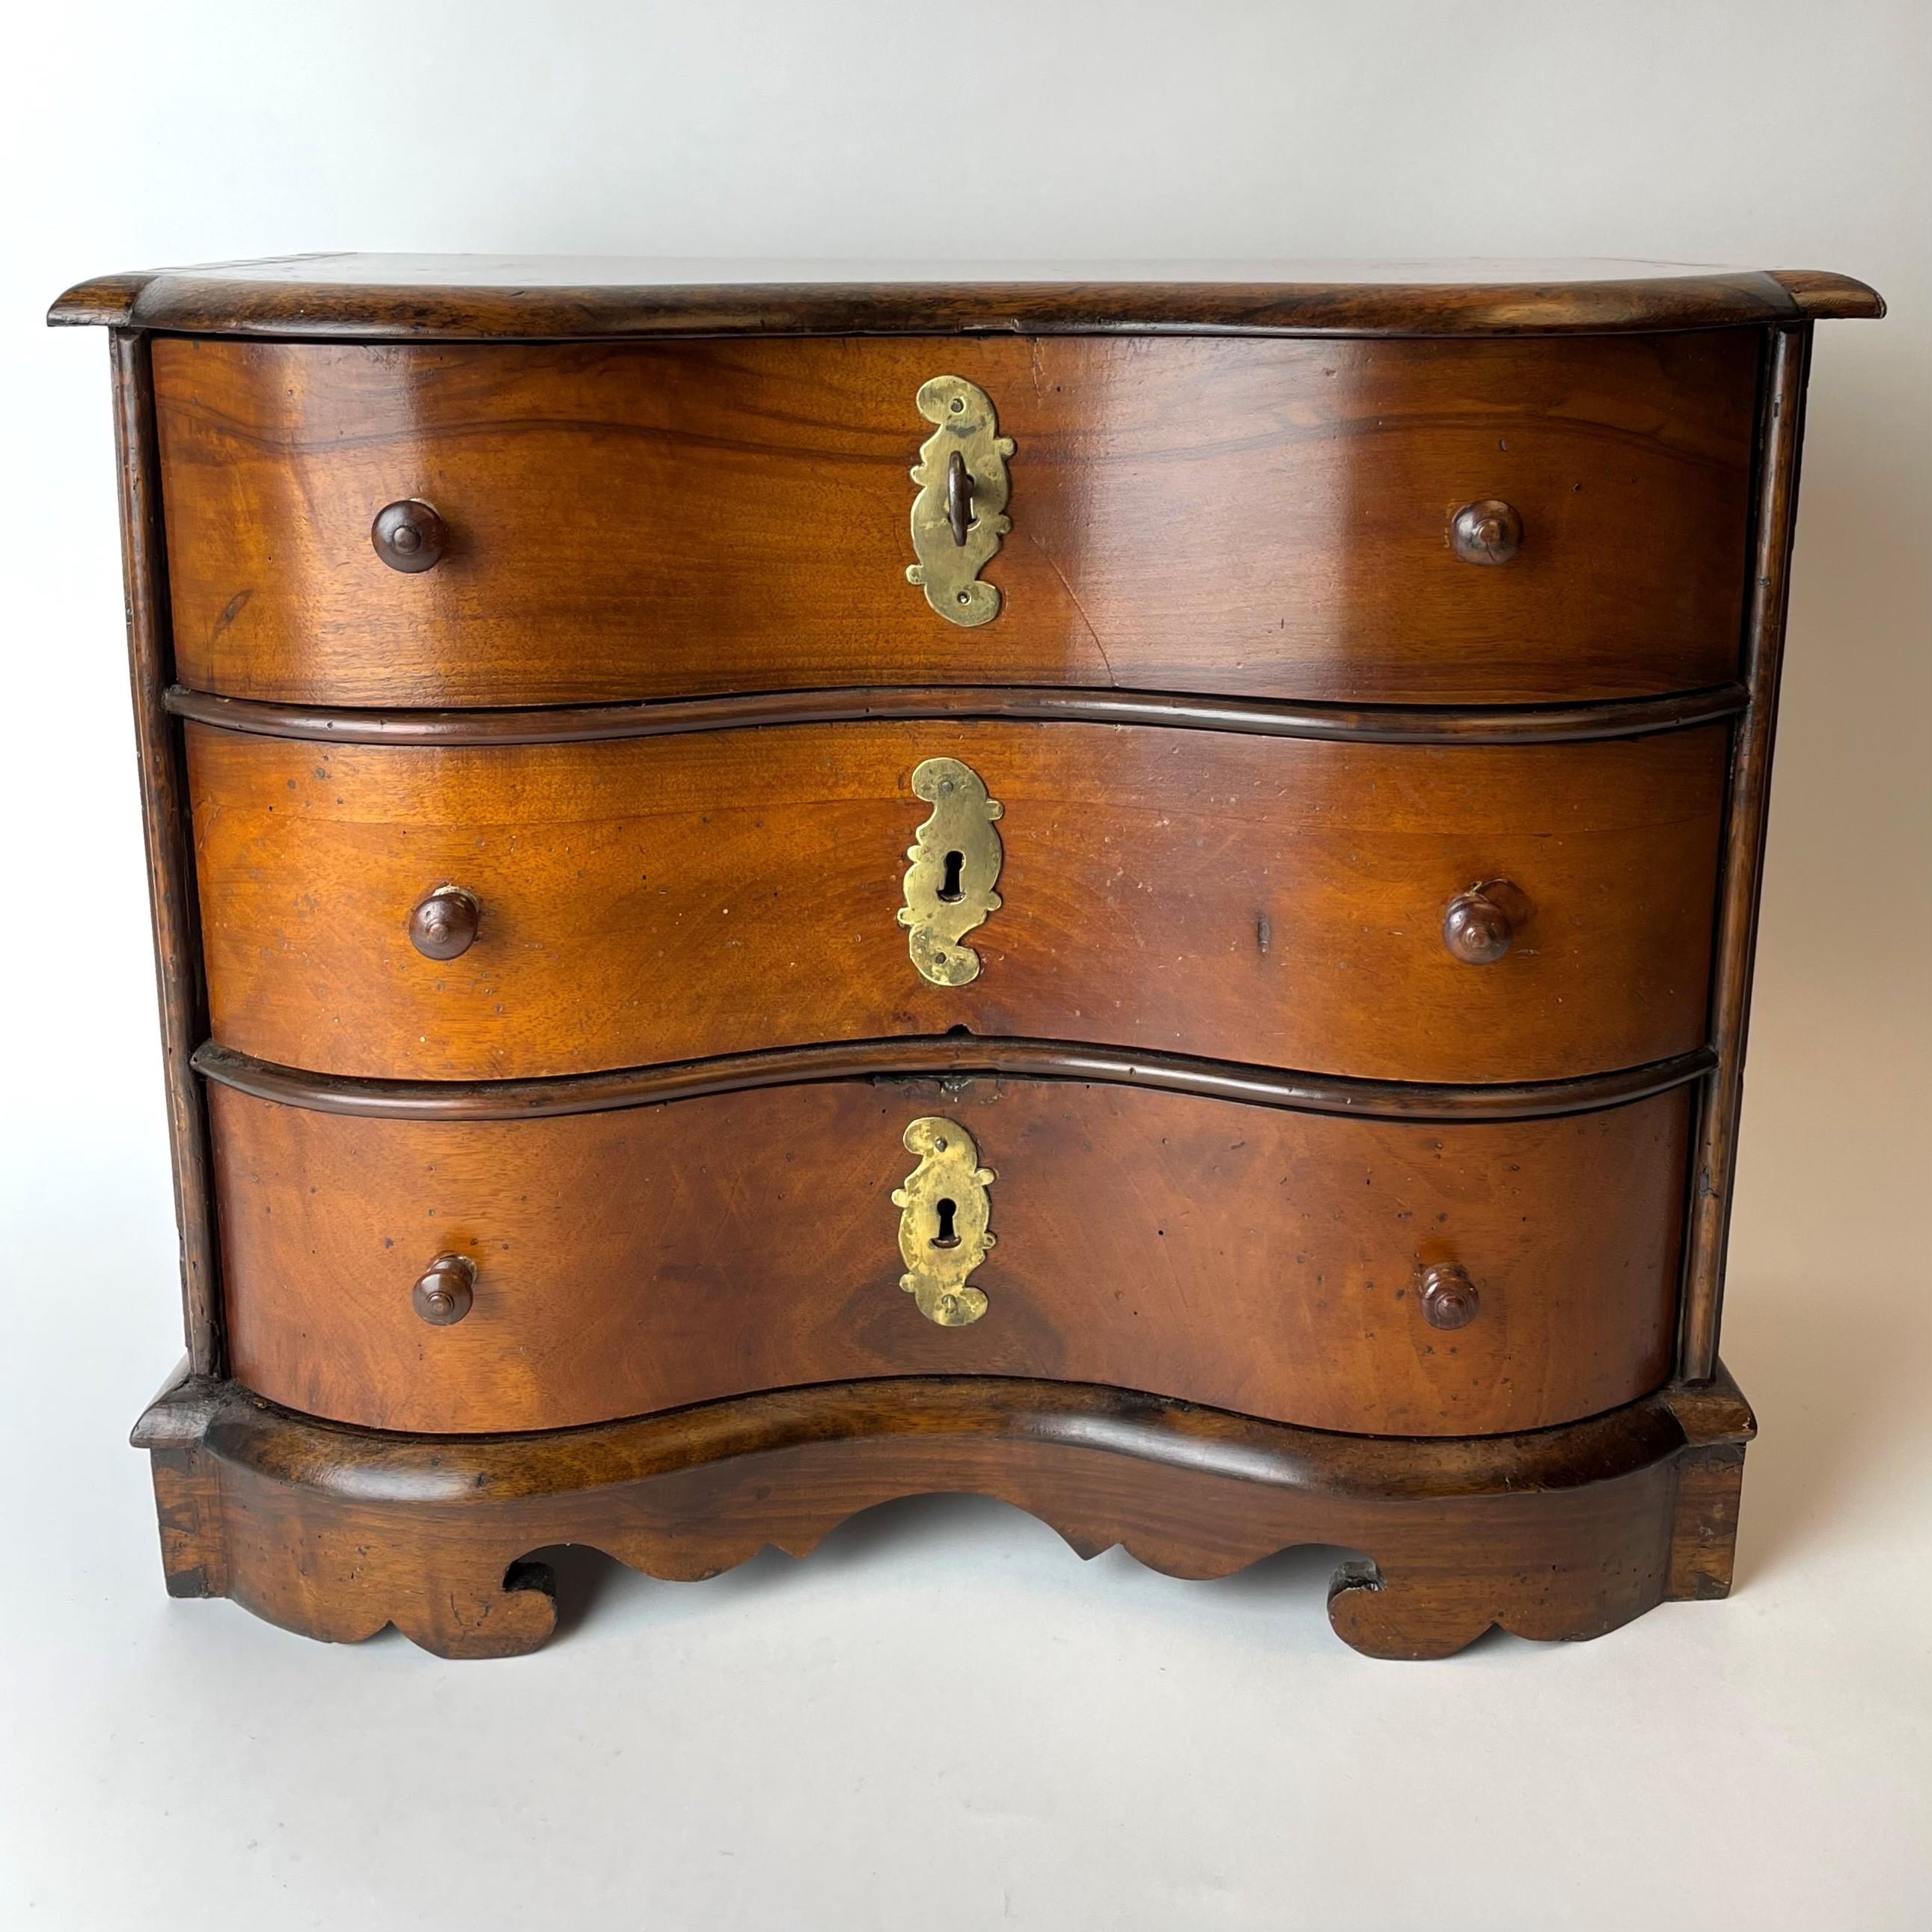 Baroque Rare and Beautiful Miniature Chest of Drawers from the Early 18th Century For Sale